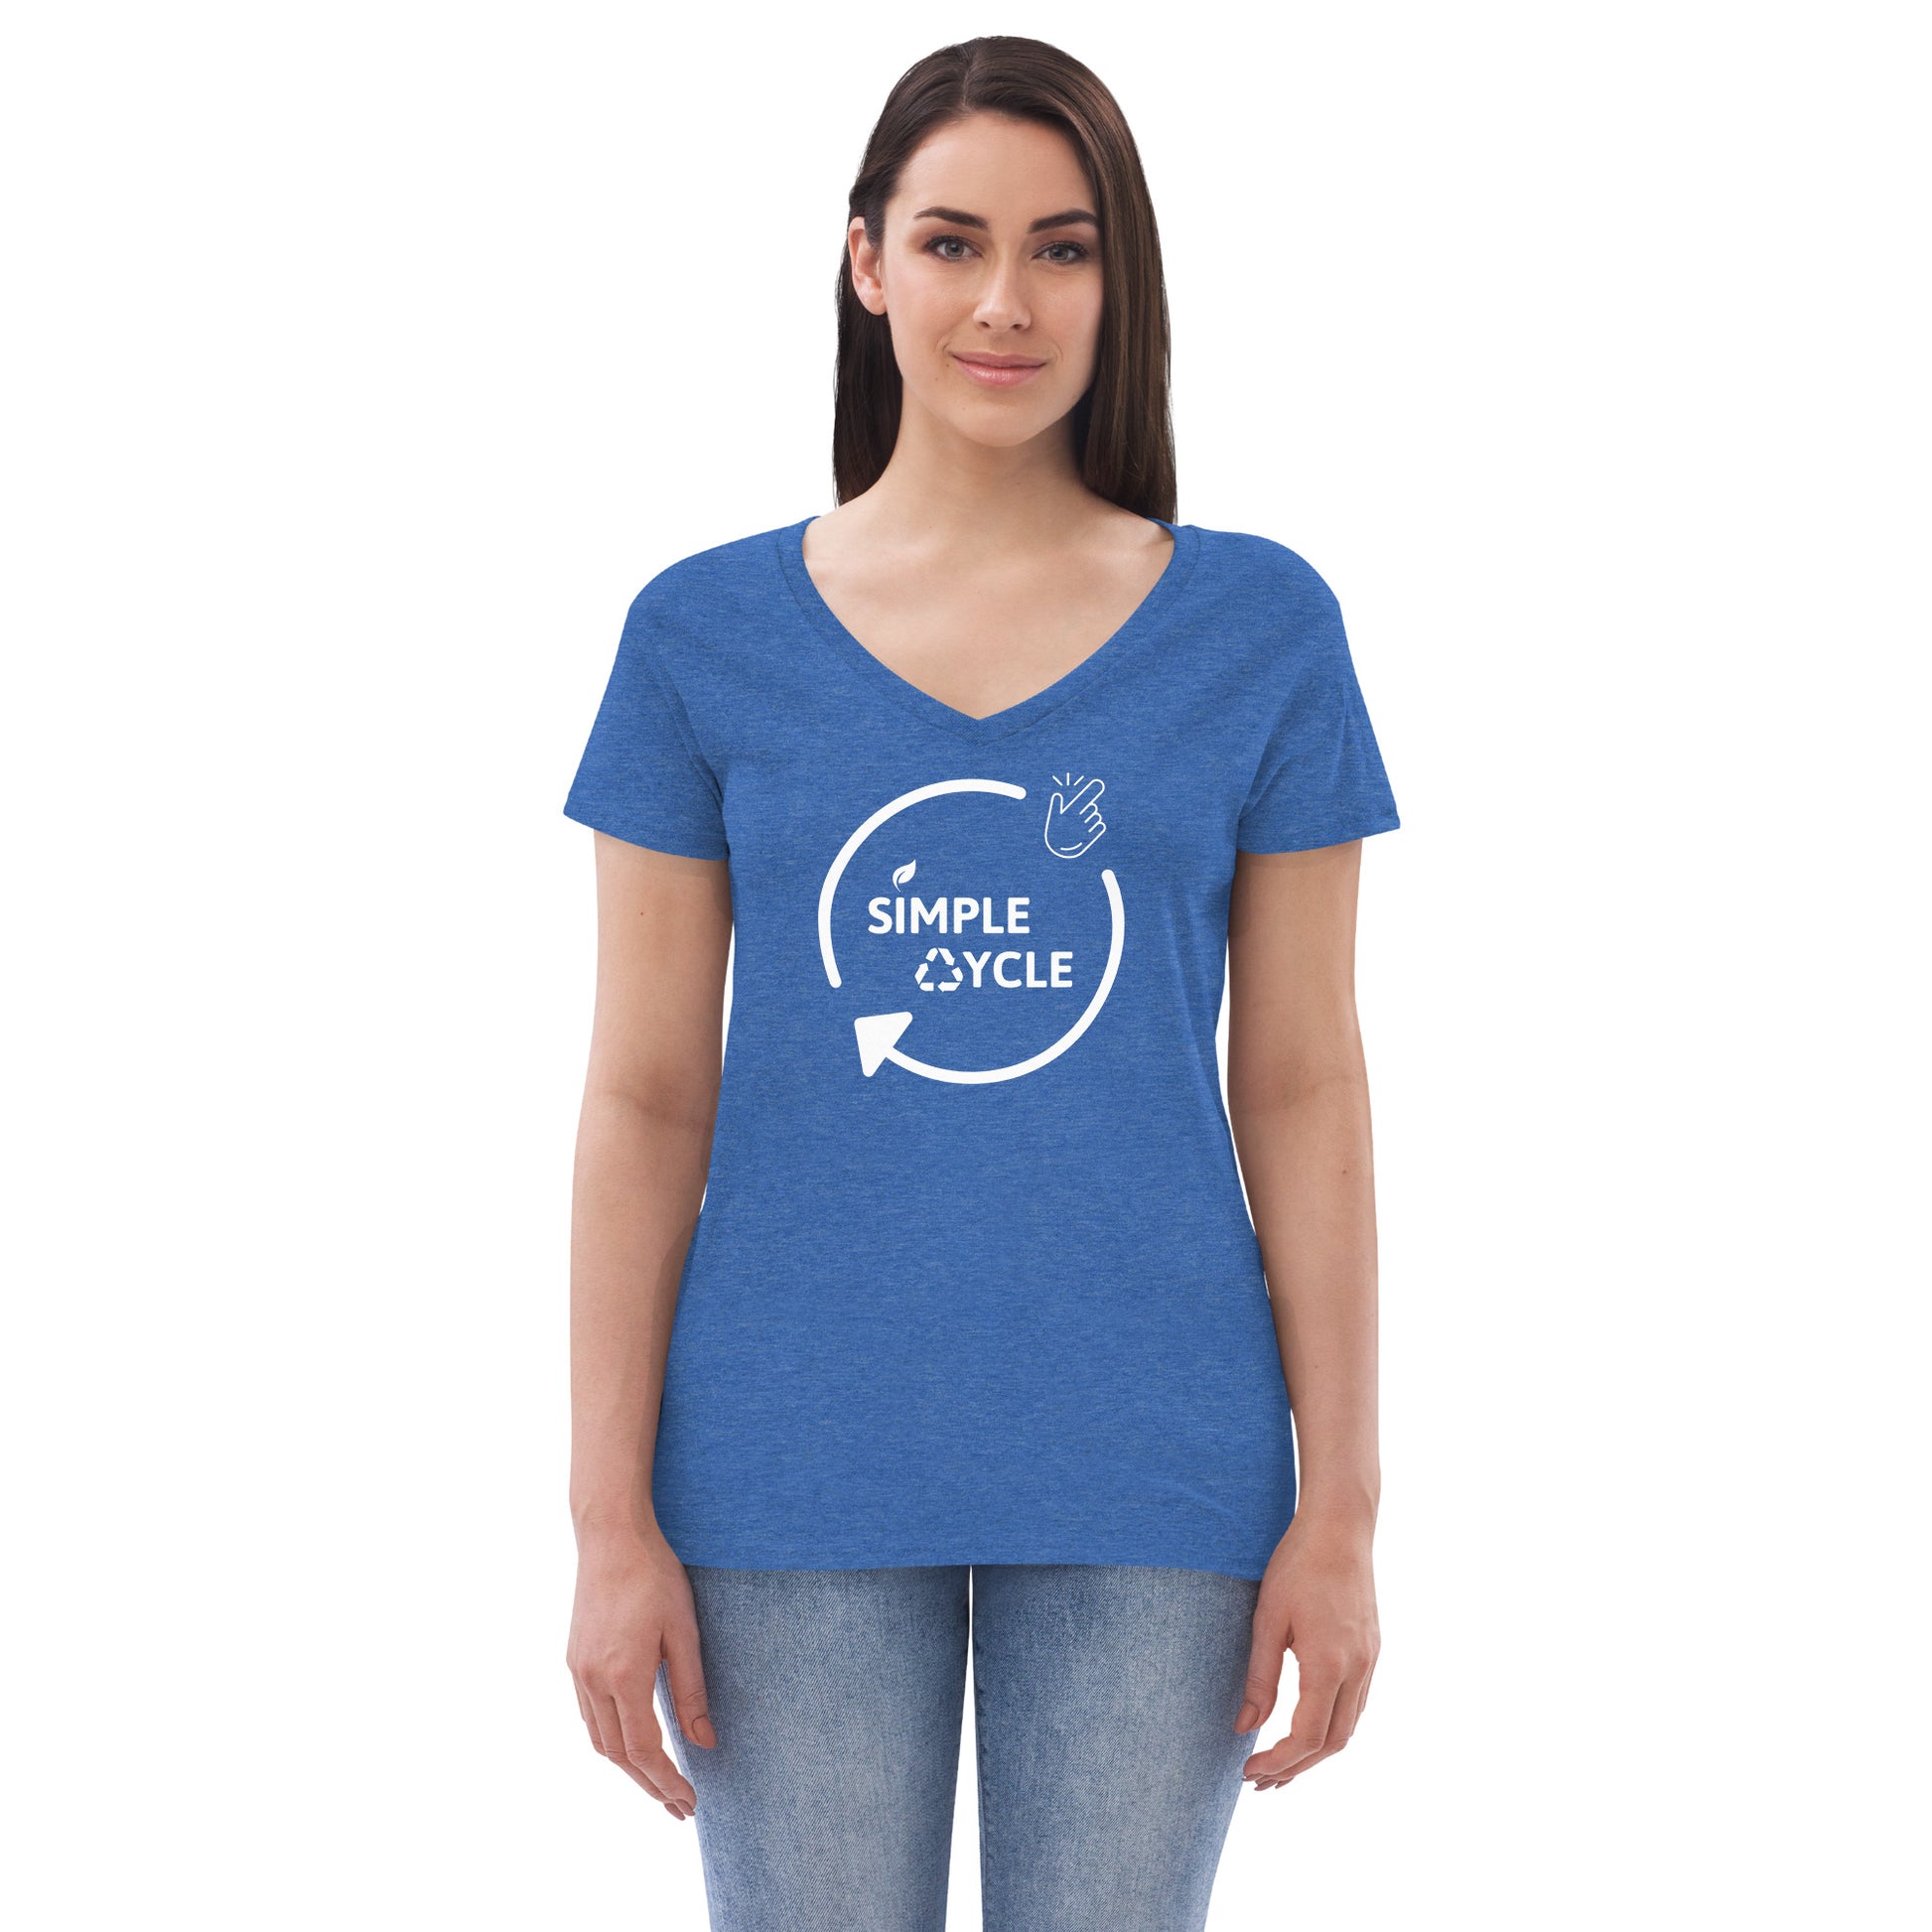 SimpleCycle Women’s Recycled V-Neck T-Shirt heather blue front